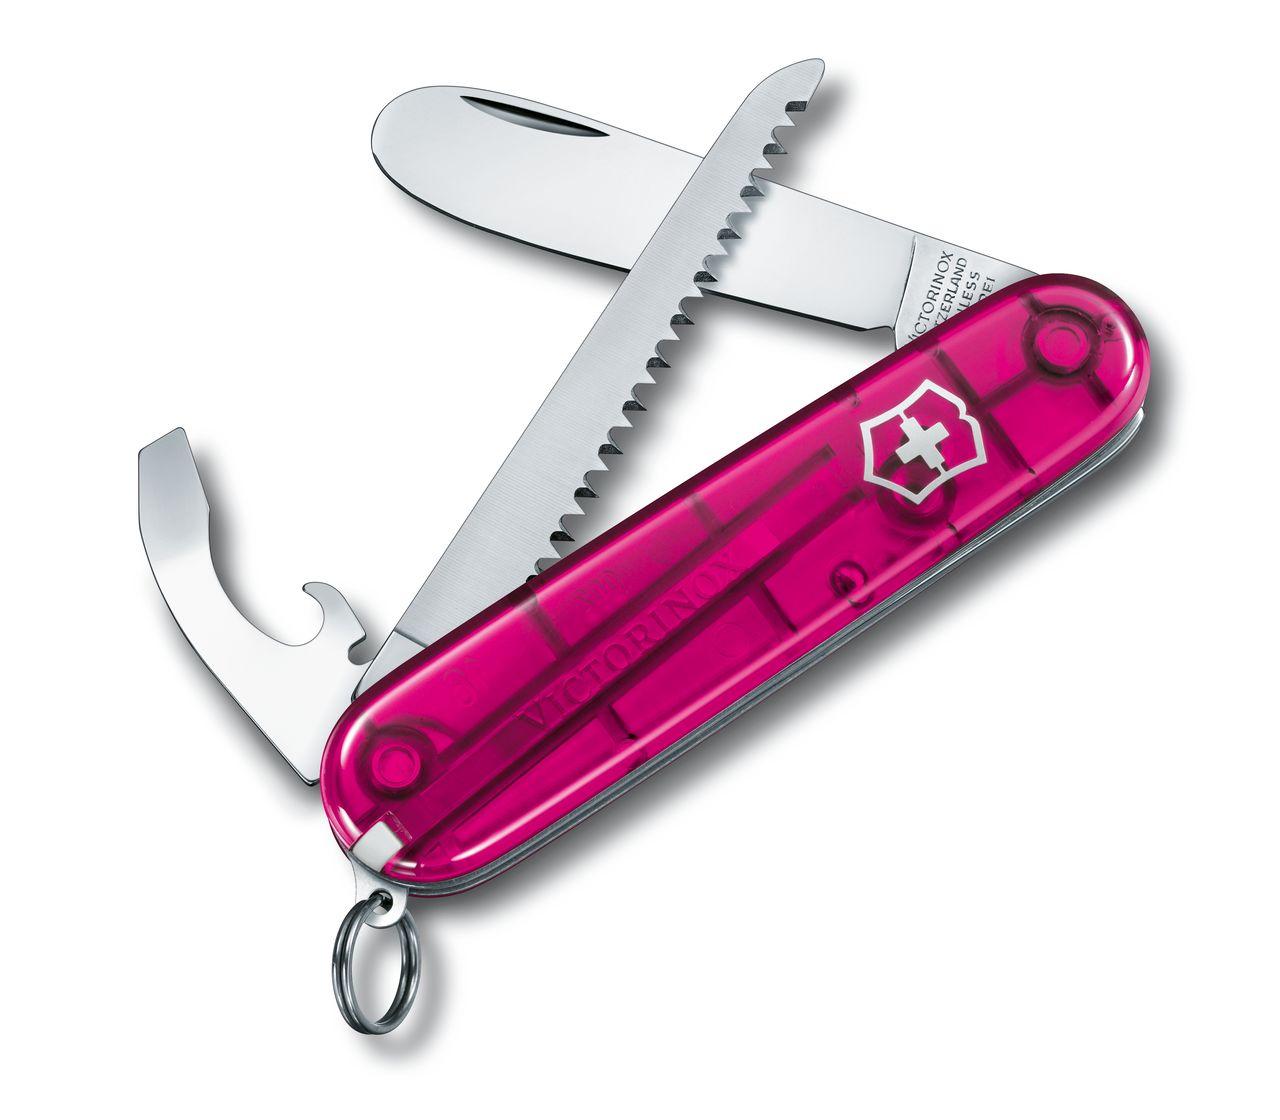 VICTORINOX SWISS MADE STAINLESS FLORAL KNIFE SINGLE BLADE HOT PINK HANDLE,  VG!